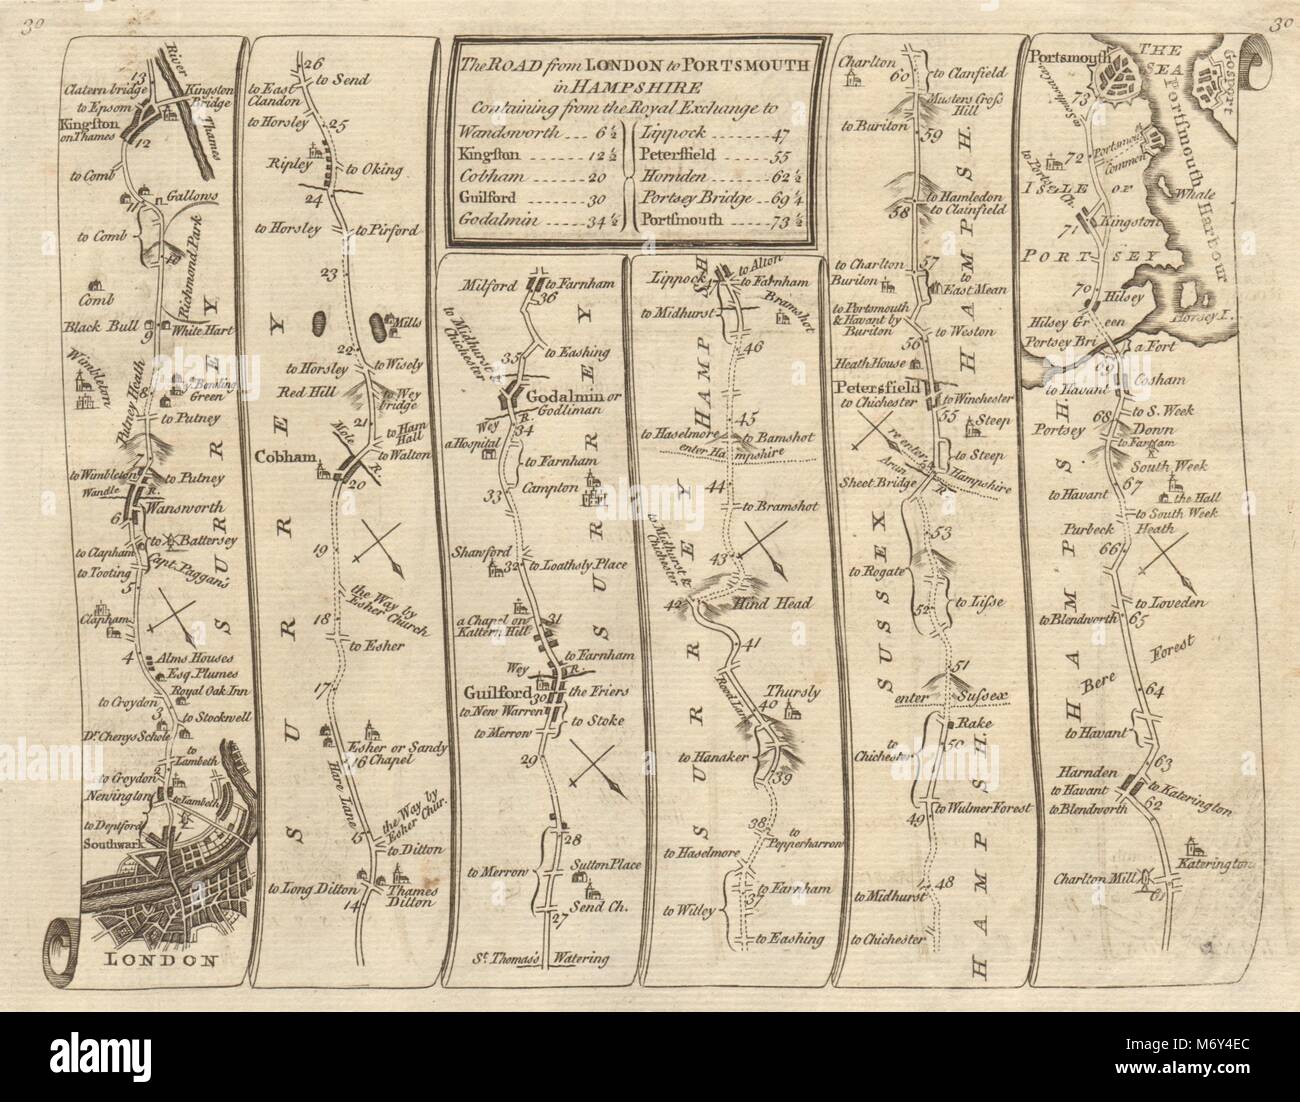 London Wandsworth Kingston Guildford Godalming Portsmouth KITCHIN road map 1767 Stock Photo